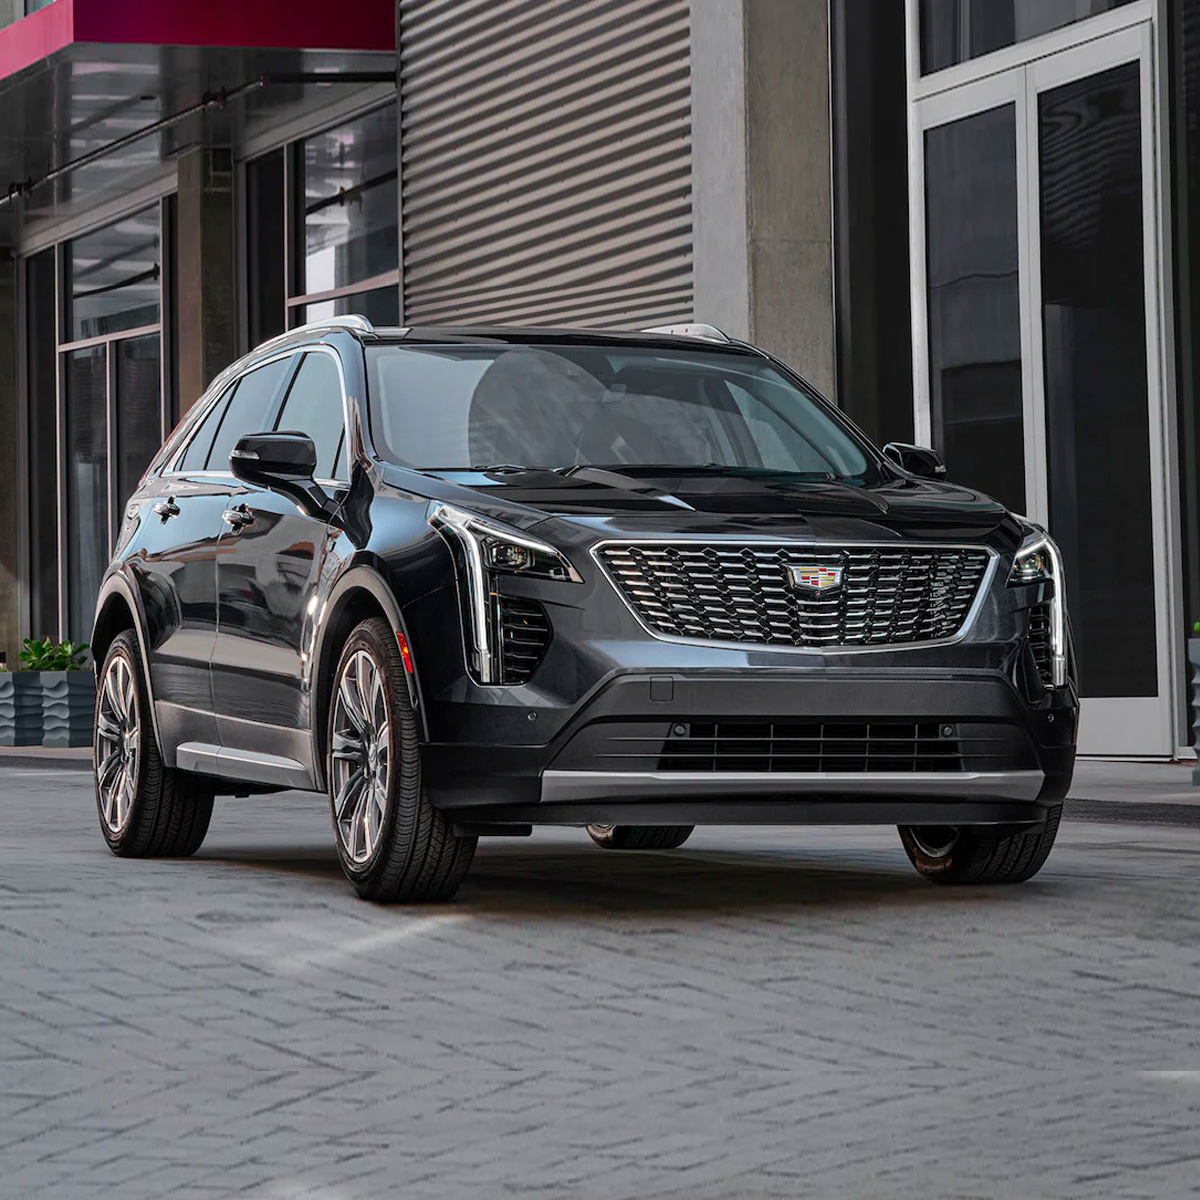 2022 Cadillac xT4 Parked outside a building